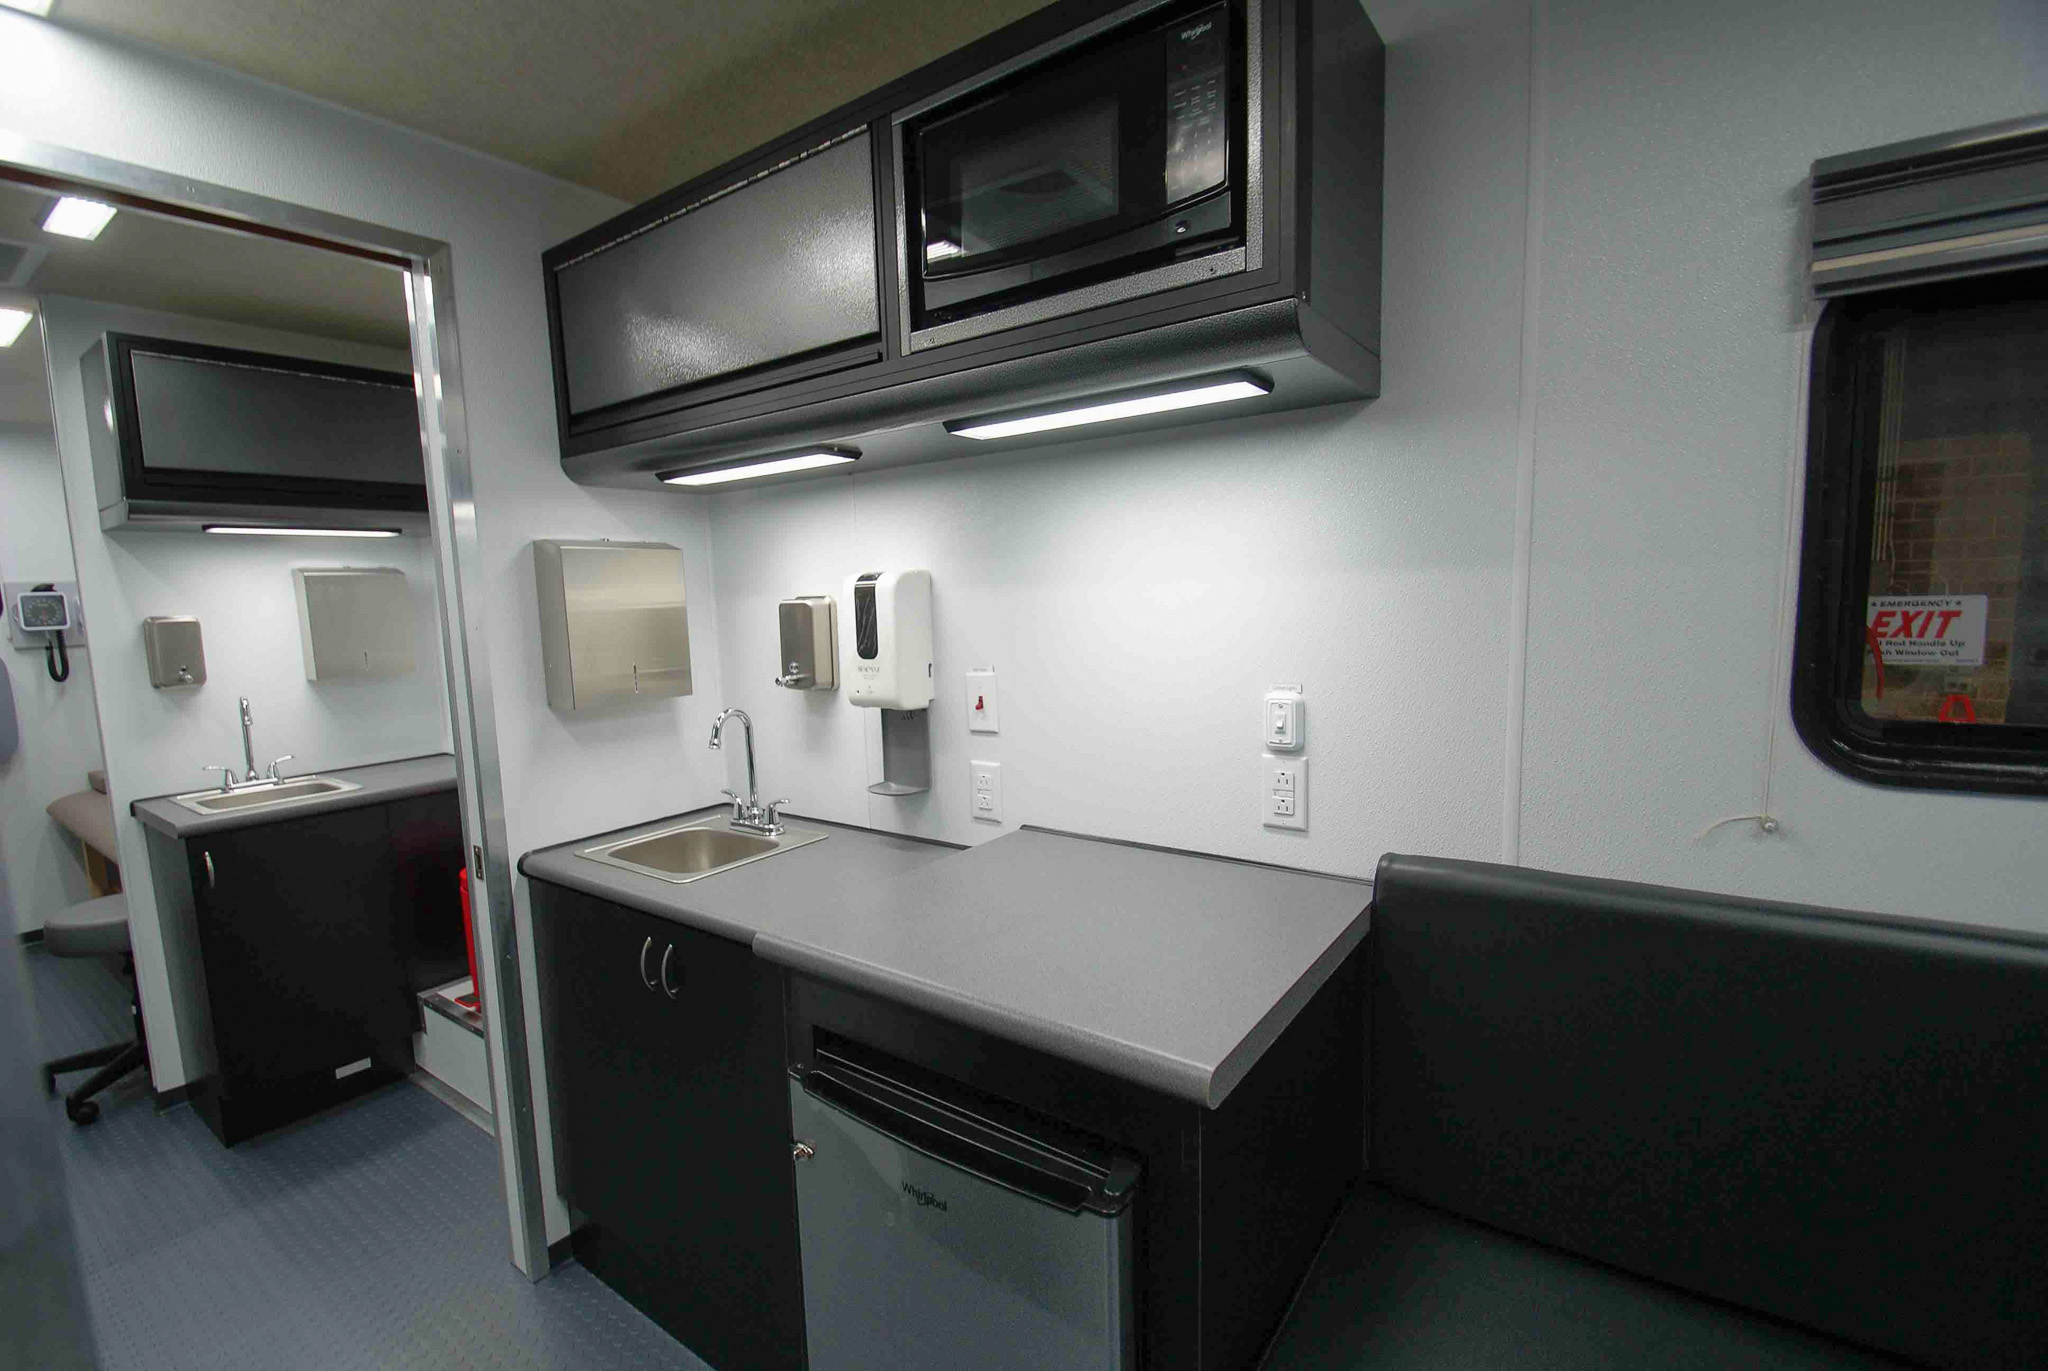 The kitchenette area inside the unit made for the OK State Health Department.